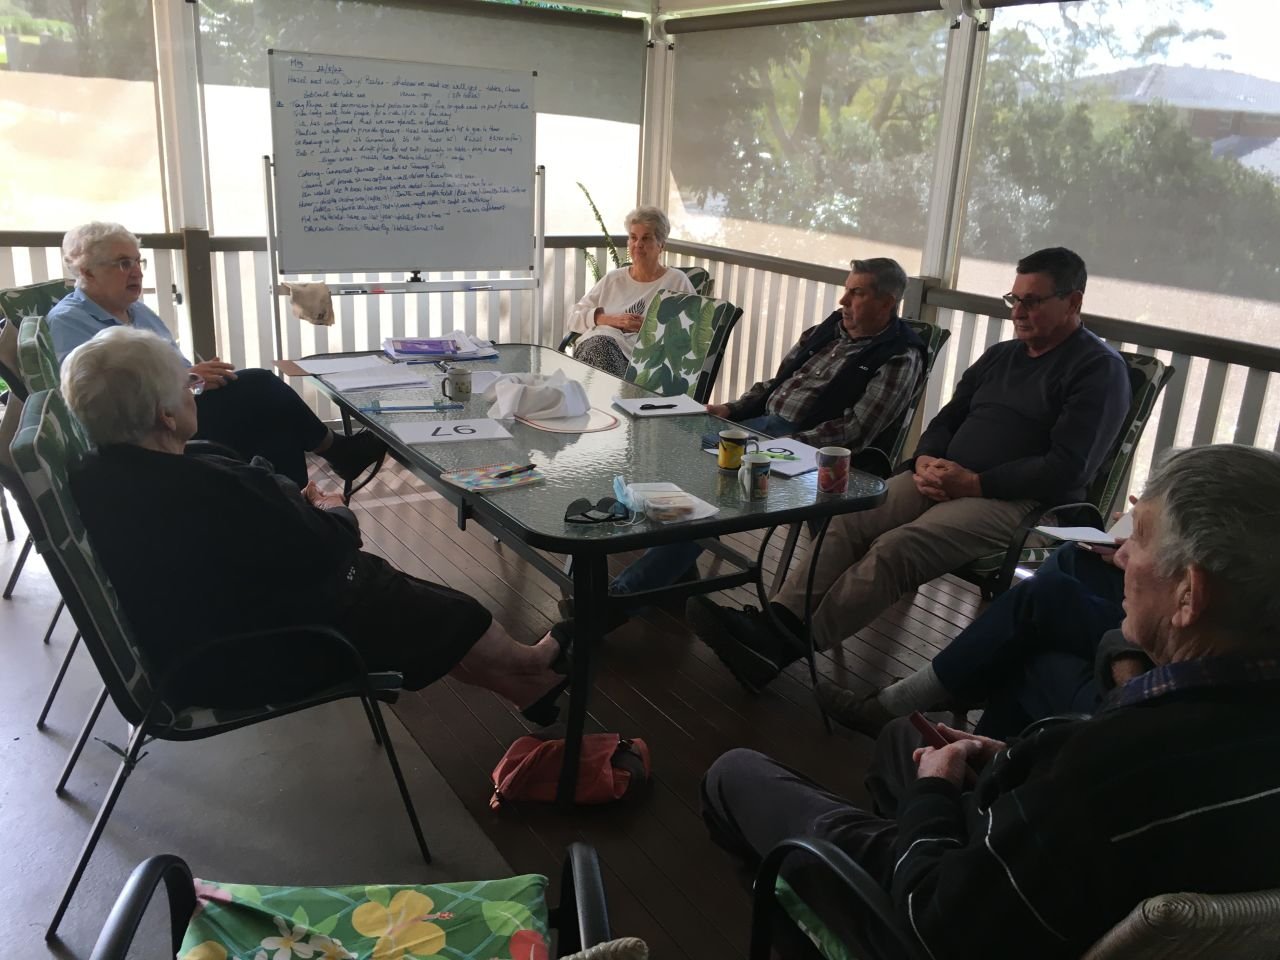 Sub committee met regularly to prepare for the 2022 Seniors EXPO scheduled for  October at the Toowoomba Showgrounds.